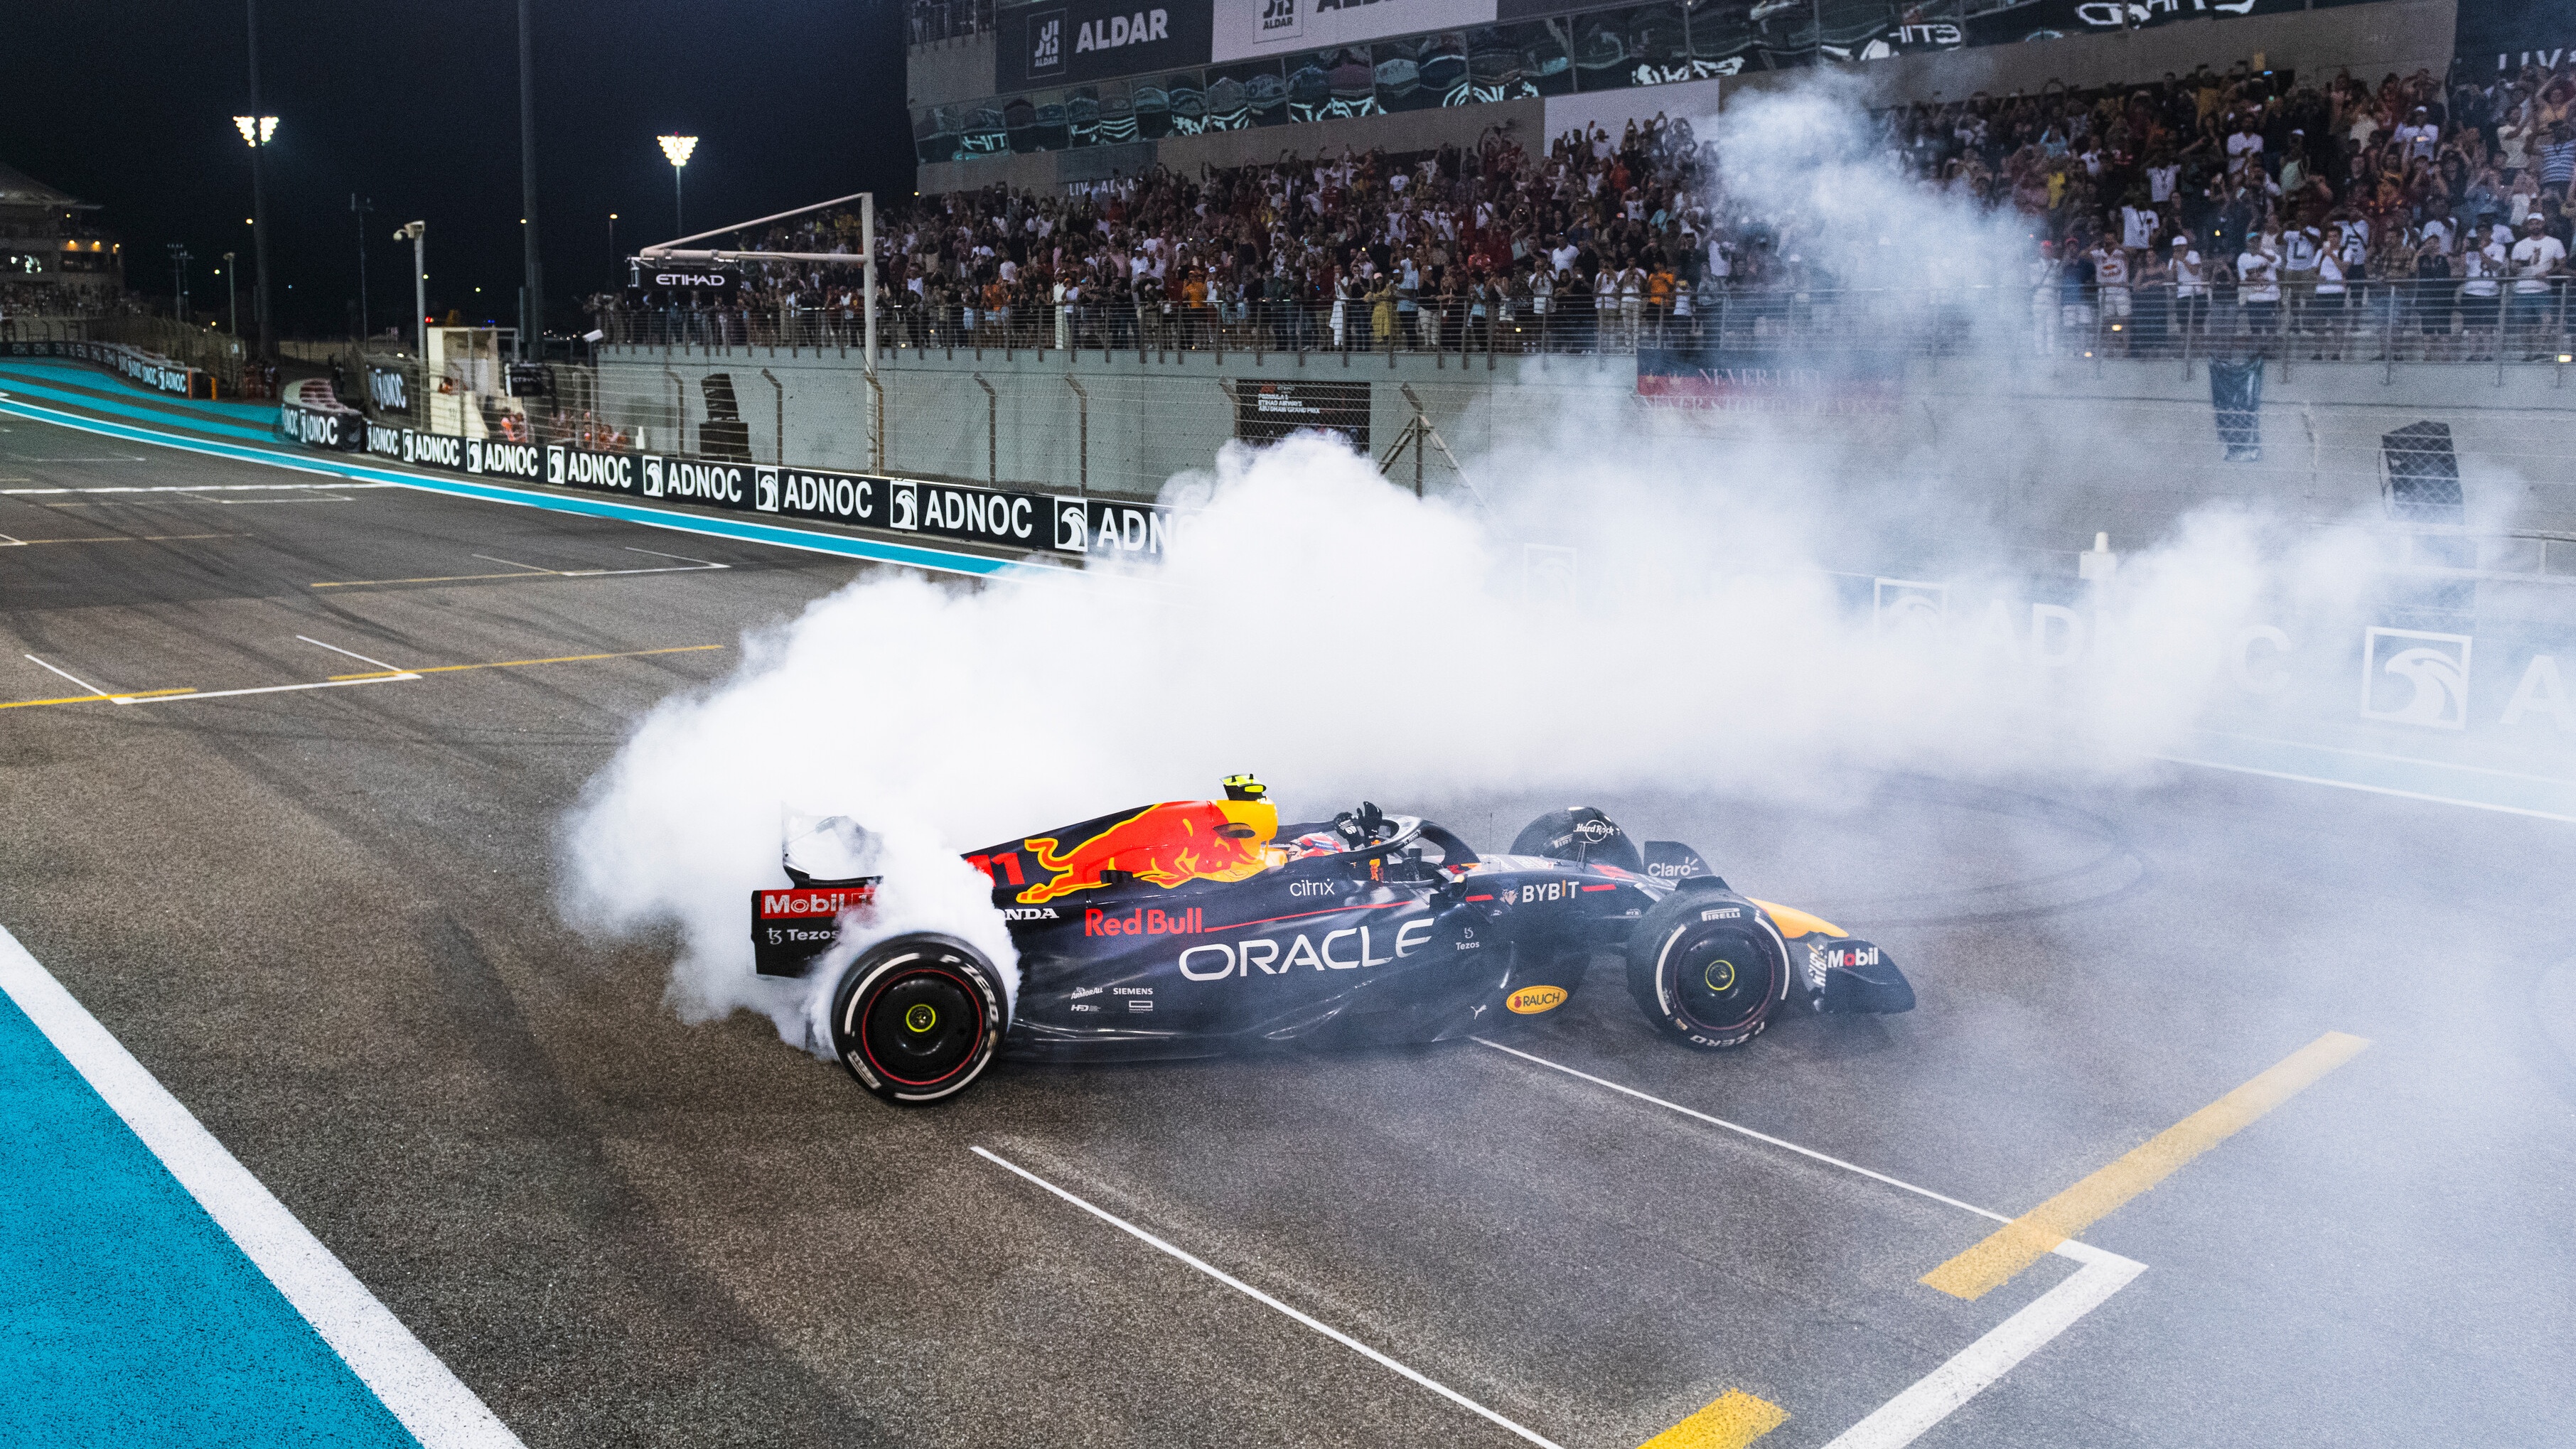 Red Bull F1 car doing donuts on the track